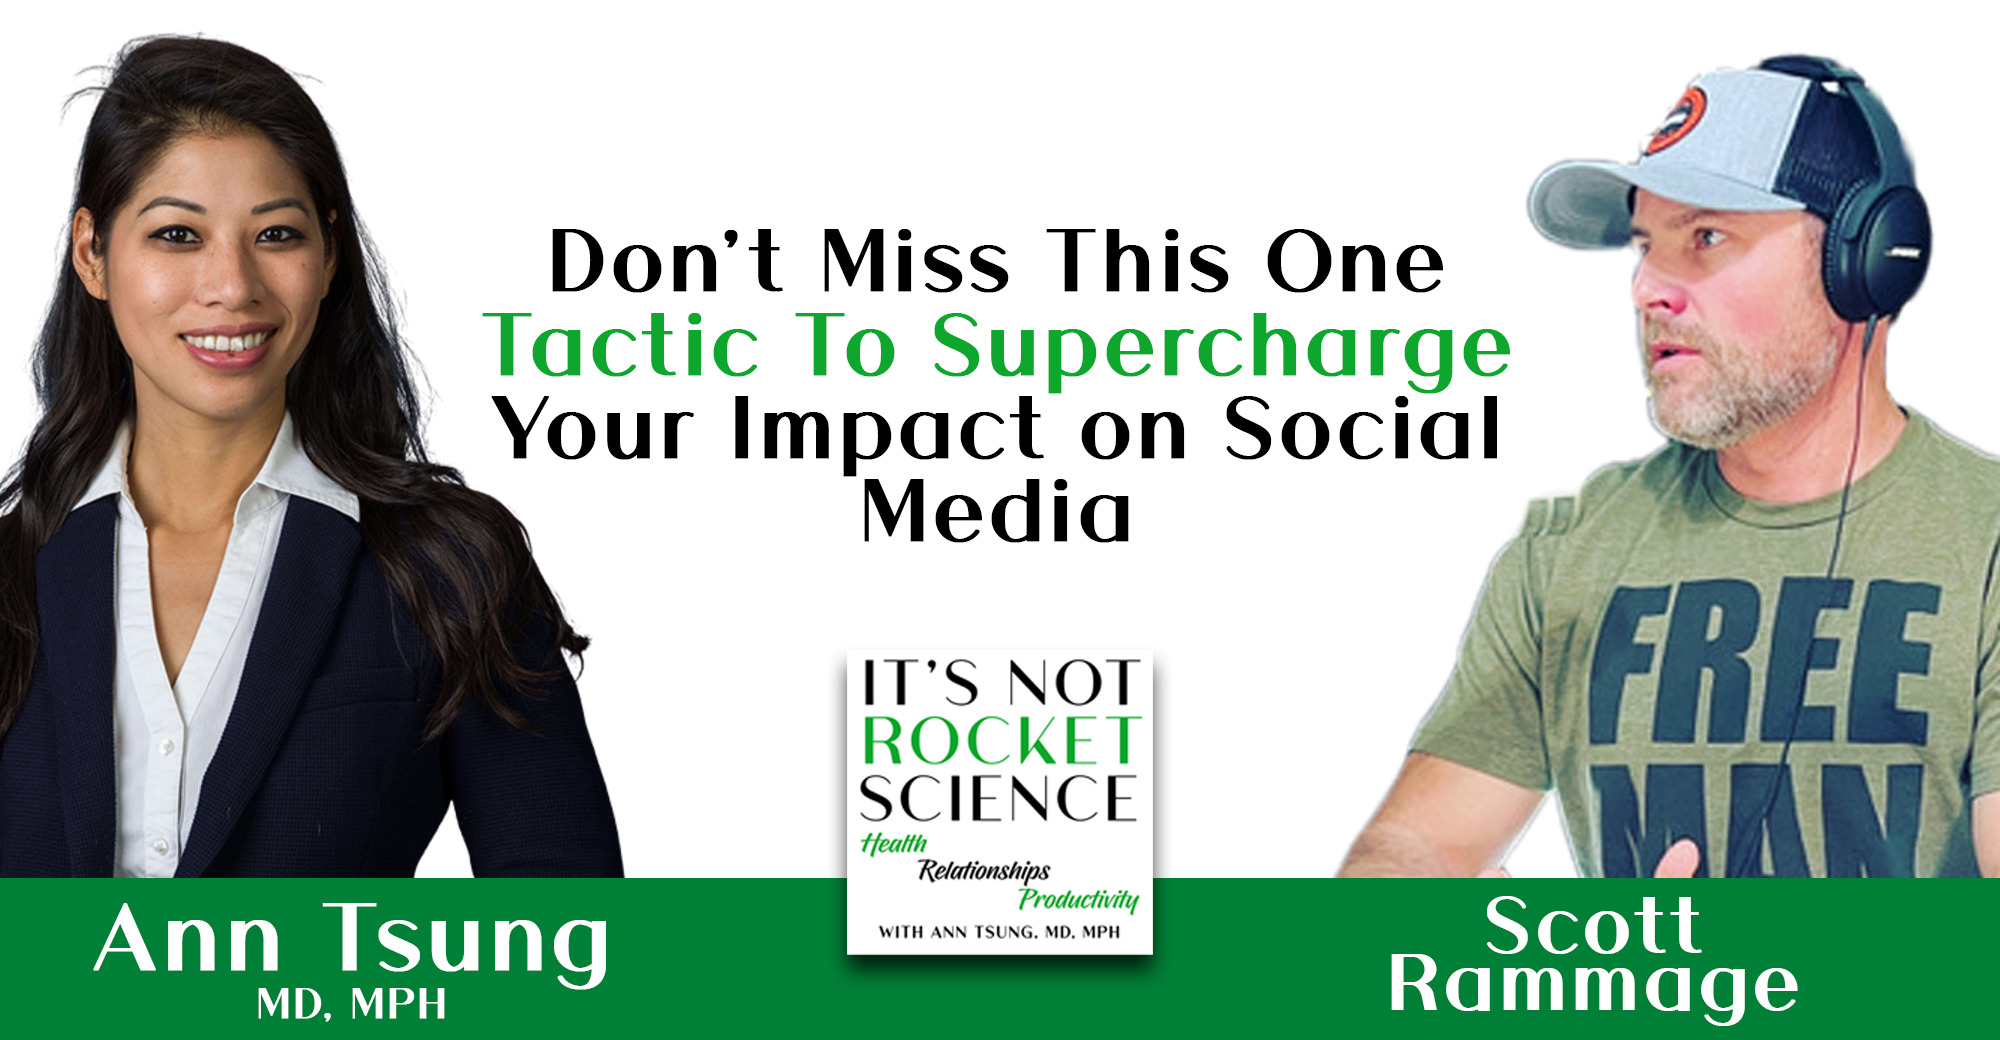 028. Don’t Miss This One Tactic to Supercharge Your Impact on Social Media with Scott Rammage